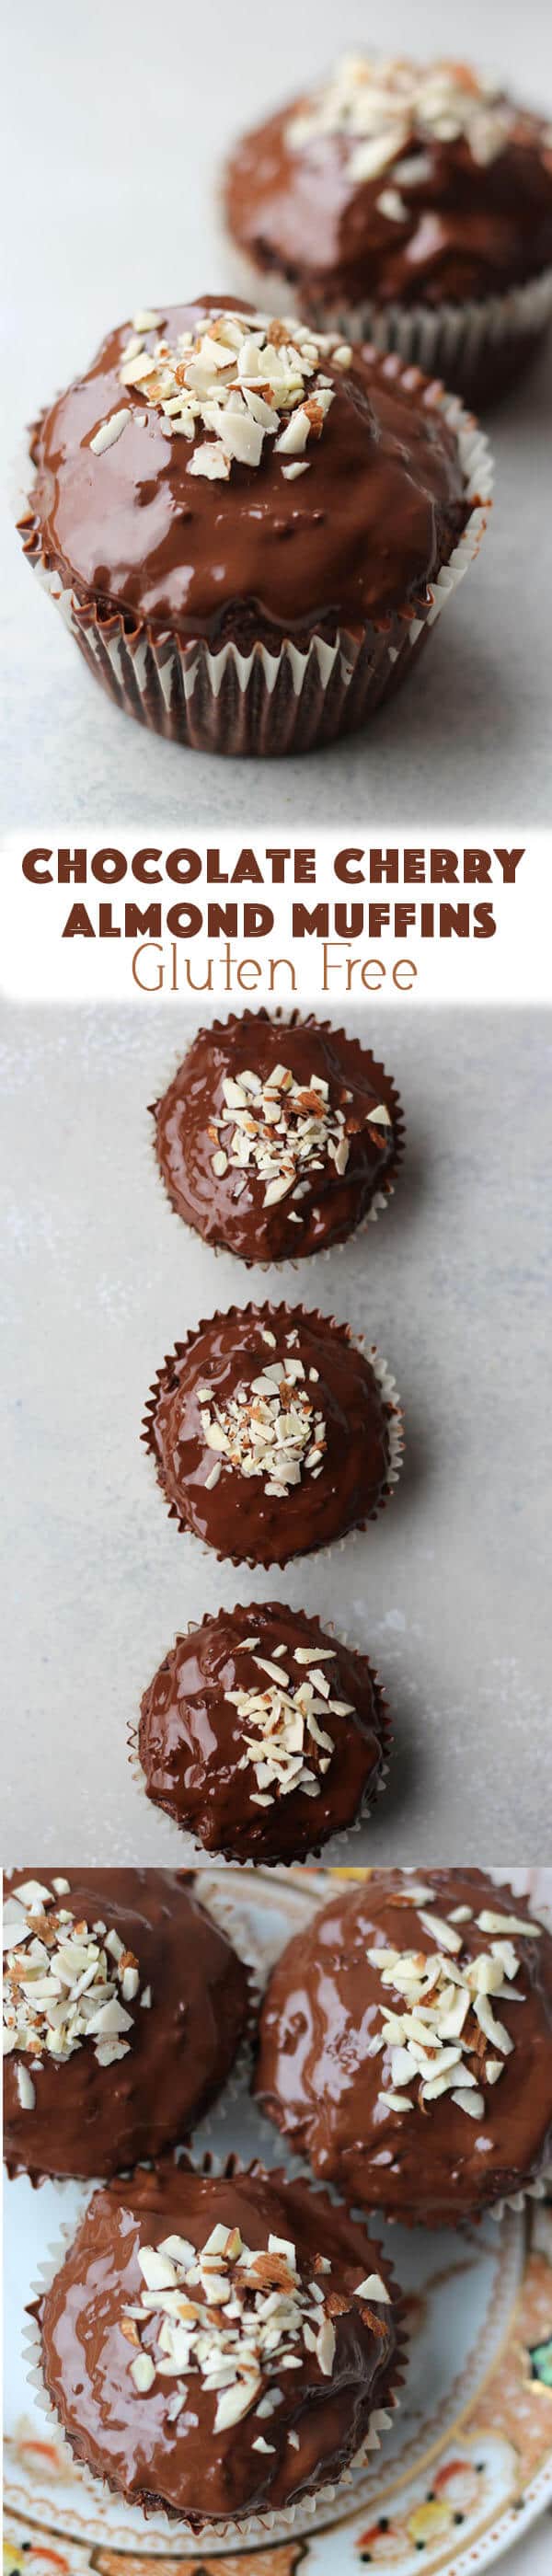 An overhead photo of two chocolate muffins with chocolate glaze with crushed almonds on top.